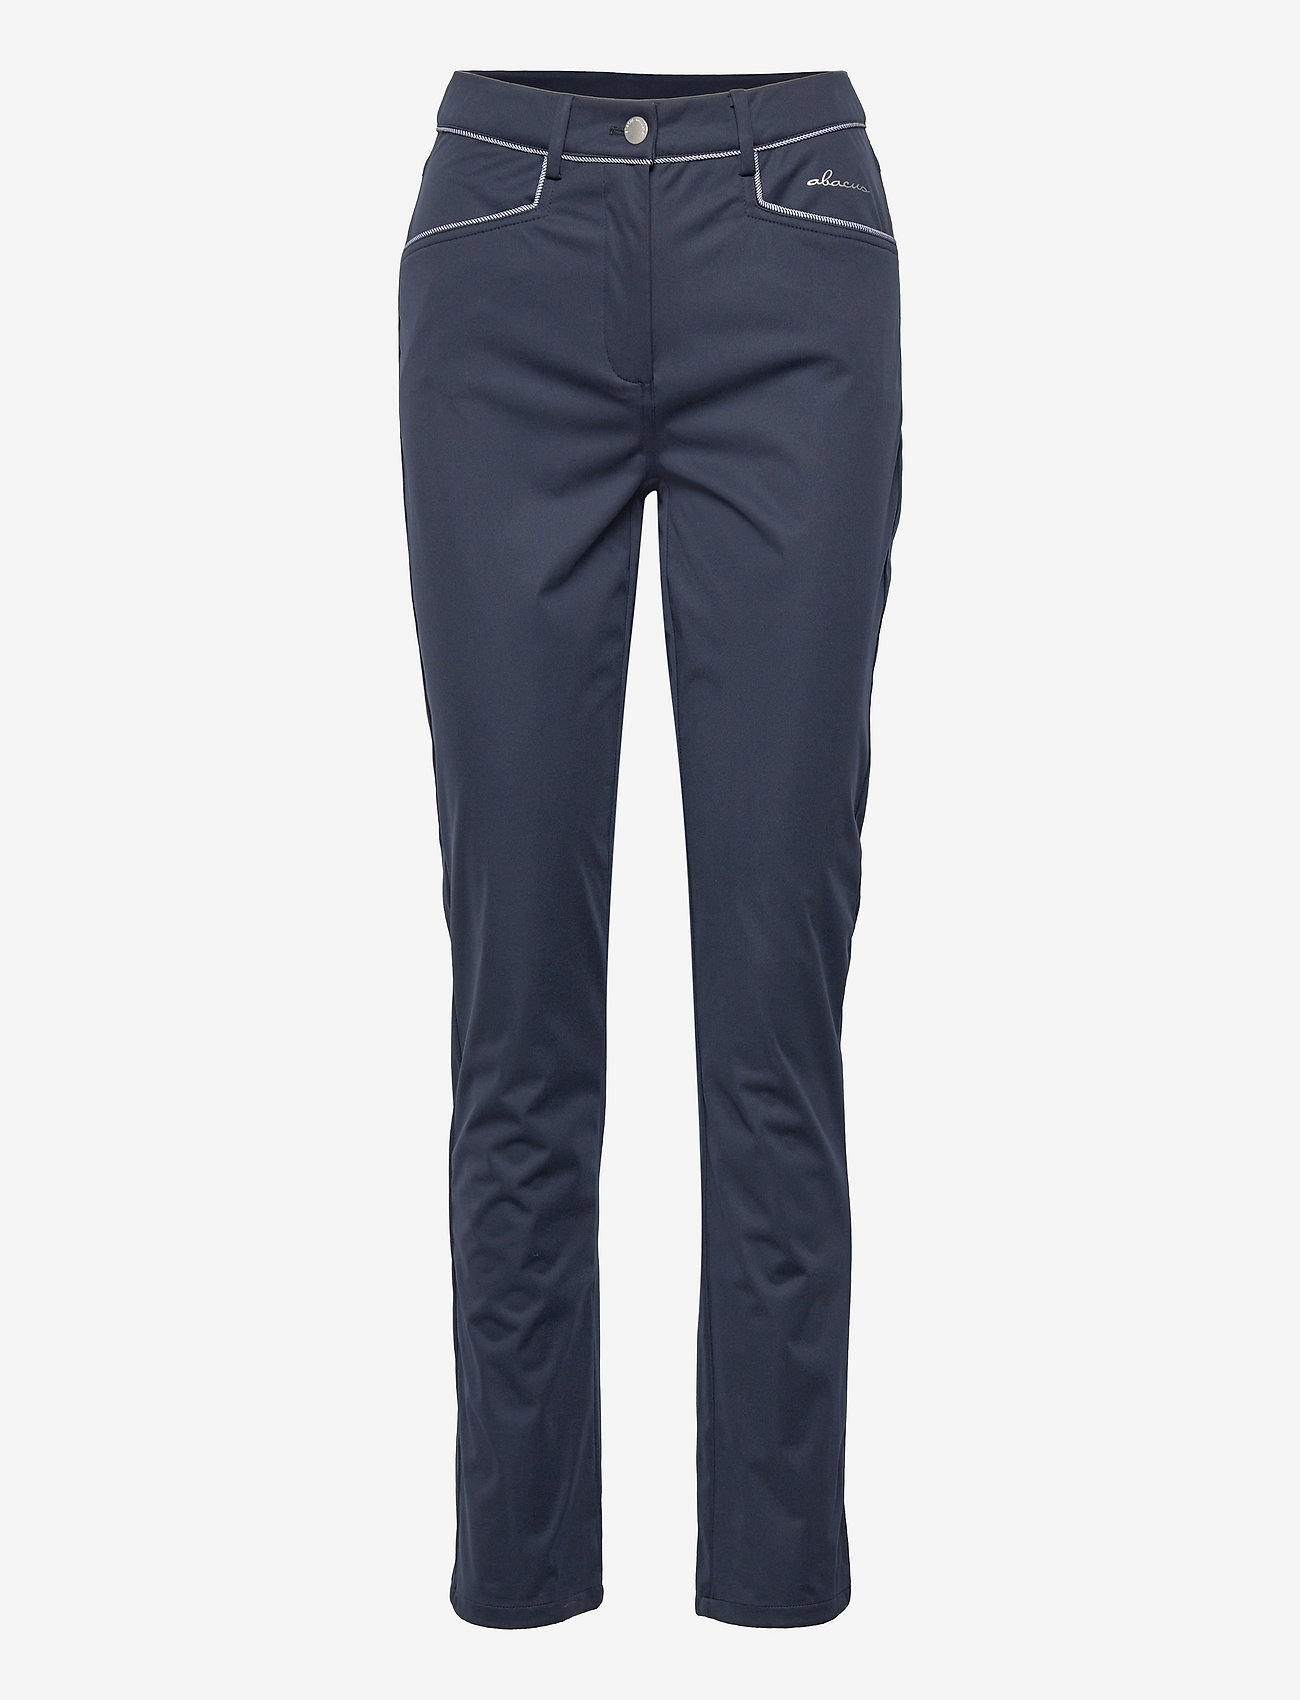 Abacus - Lds Tralee trousers - kvinder - navy - 0